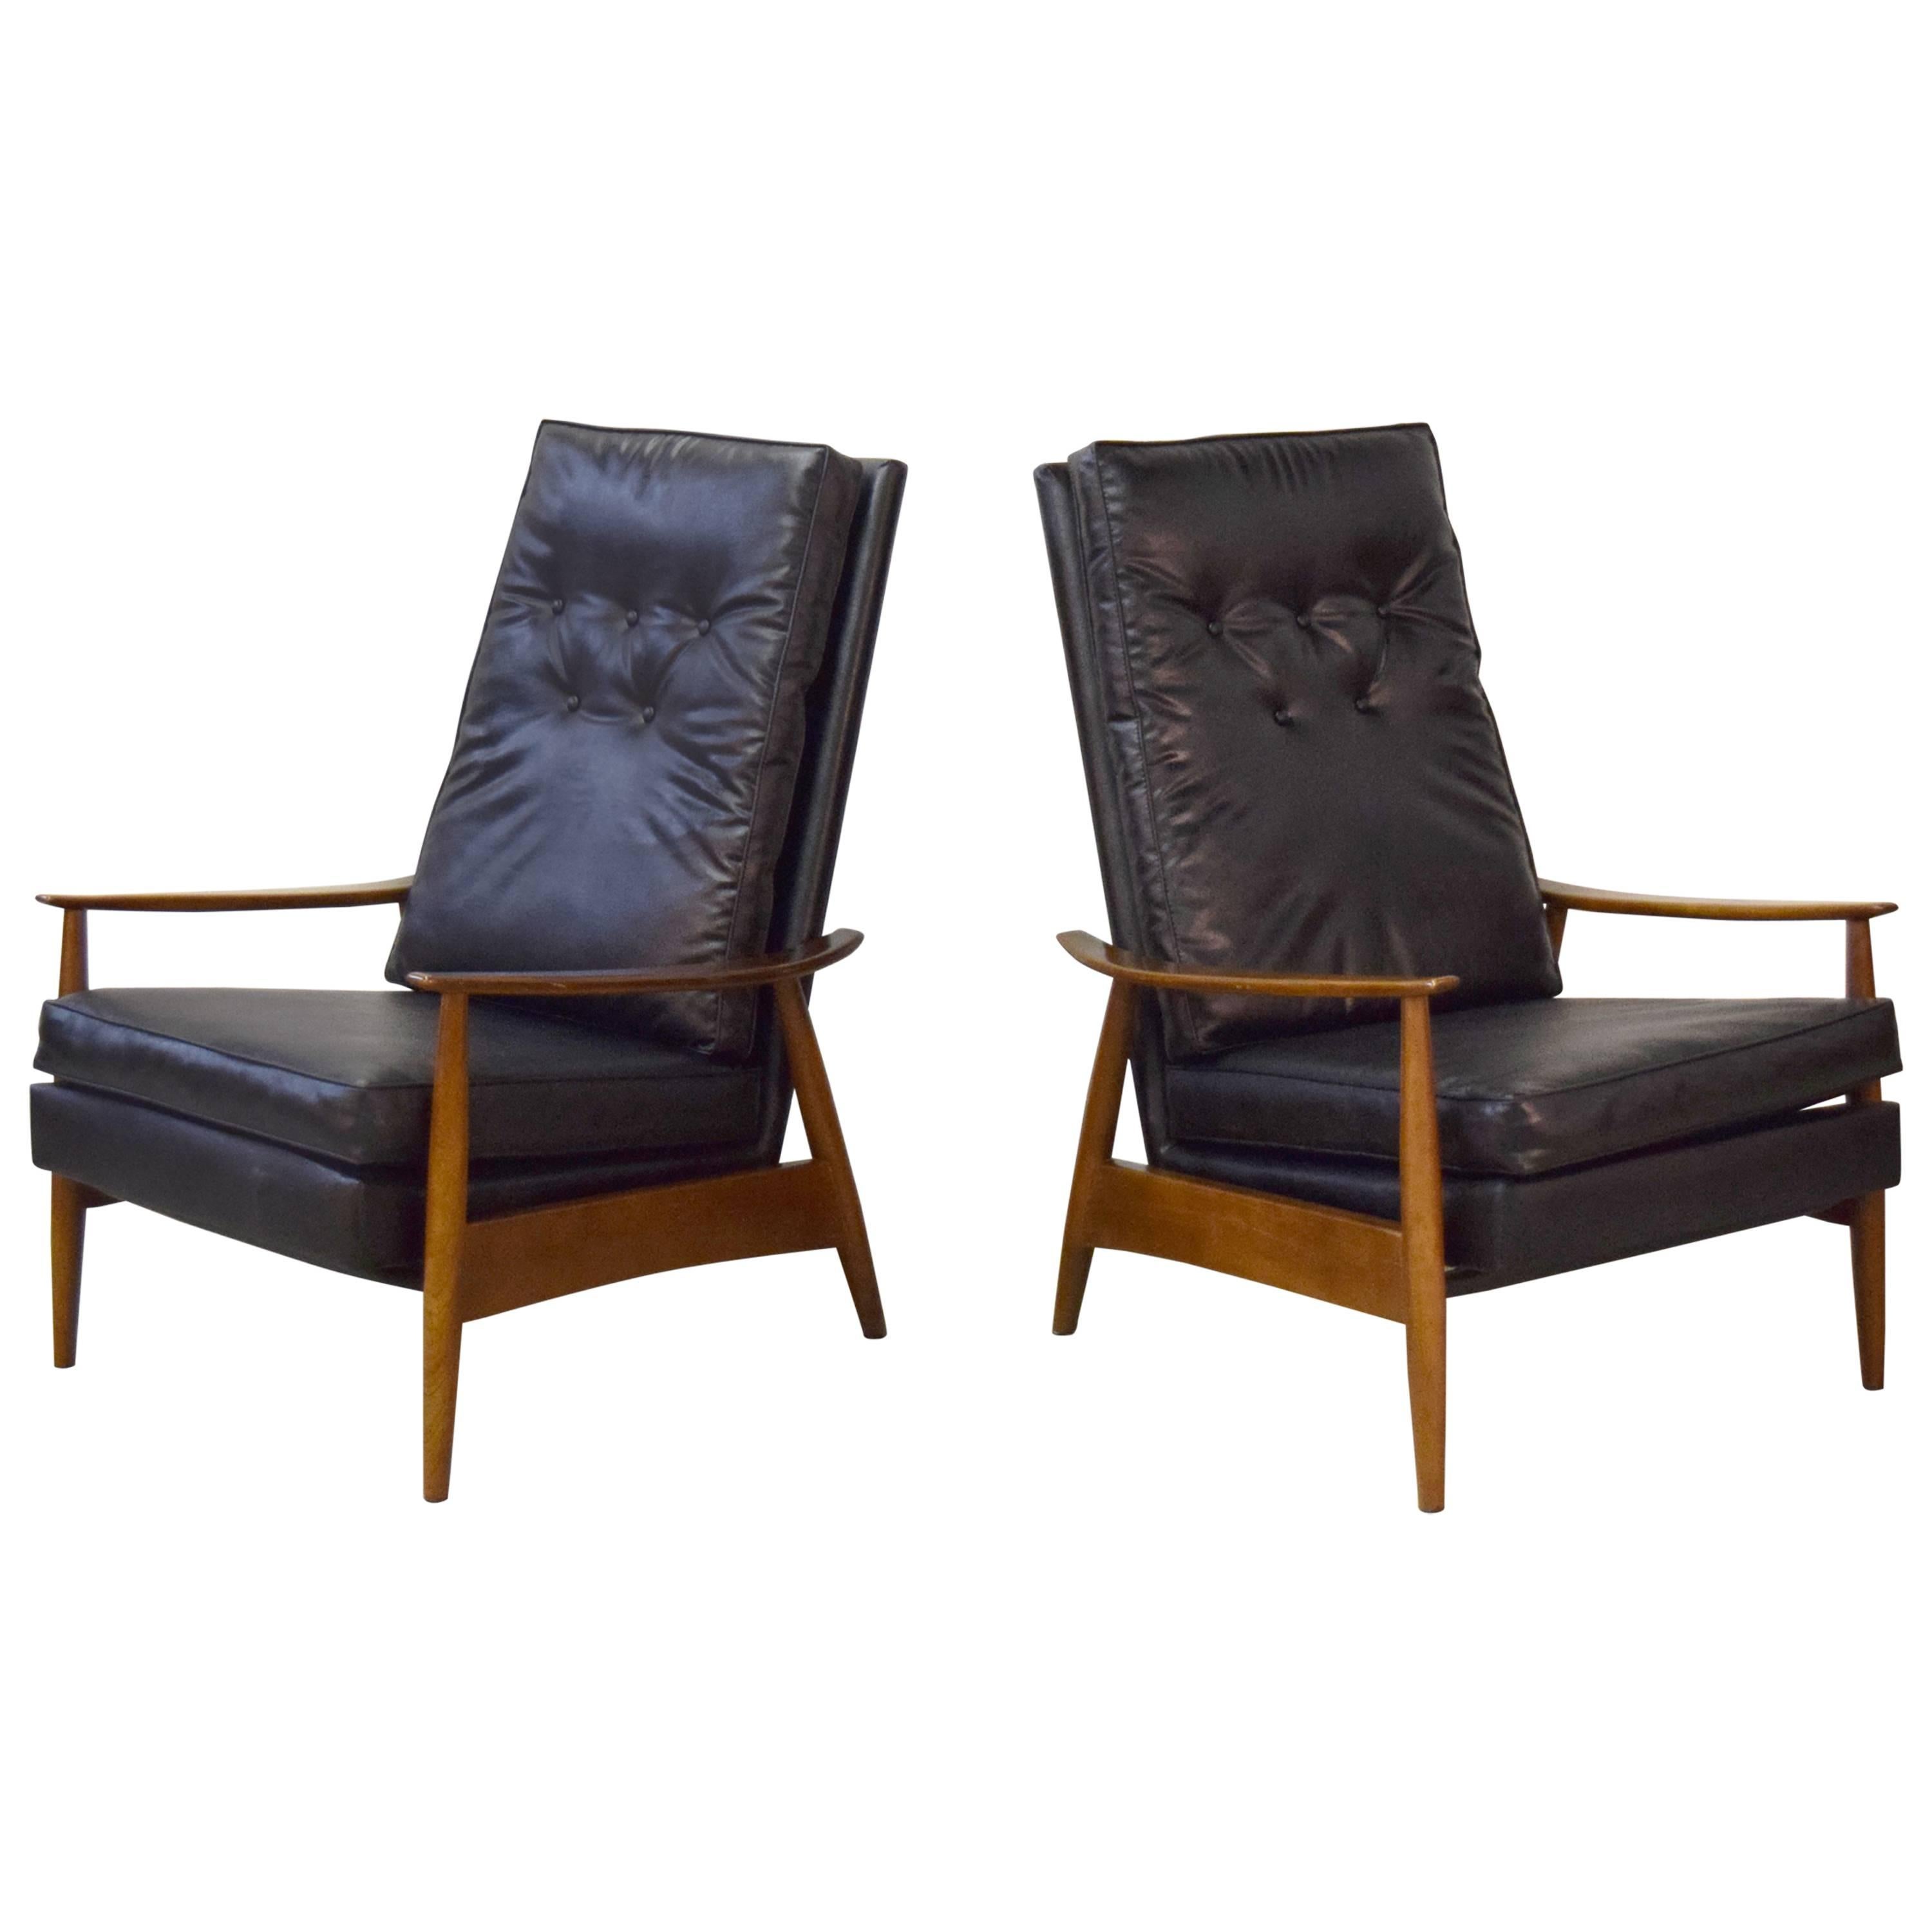 Pair of Milo Baughman Recliner Lounge Chairs